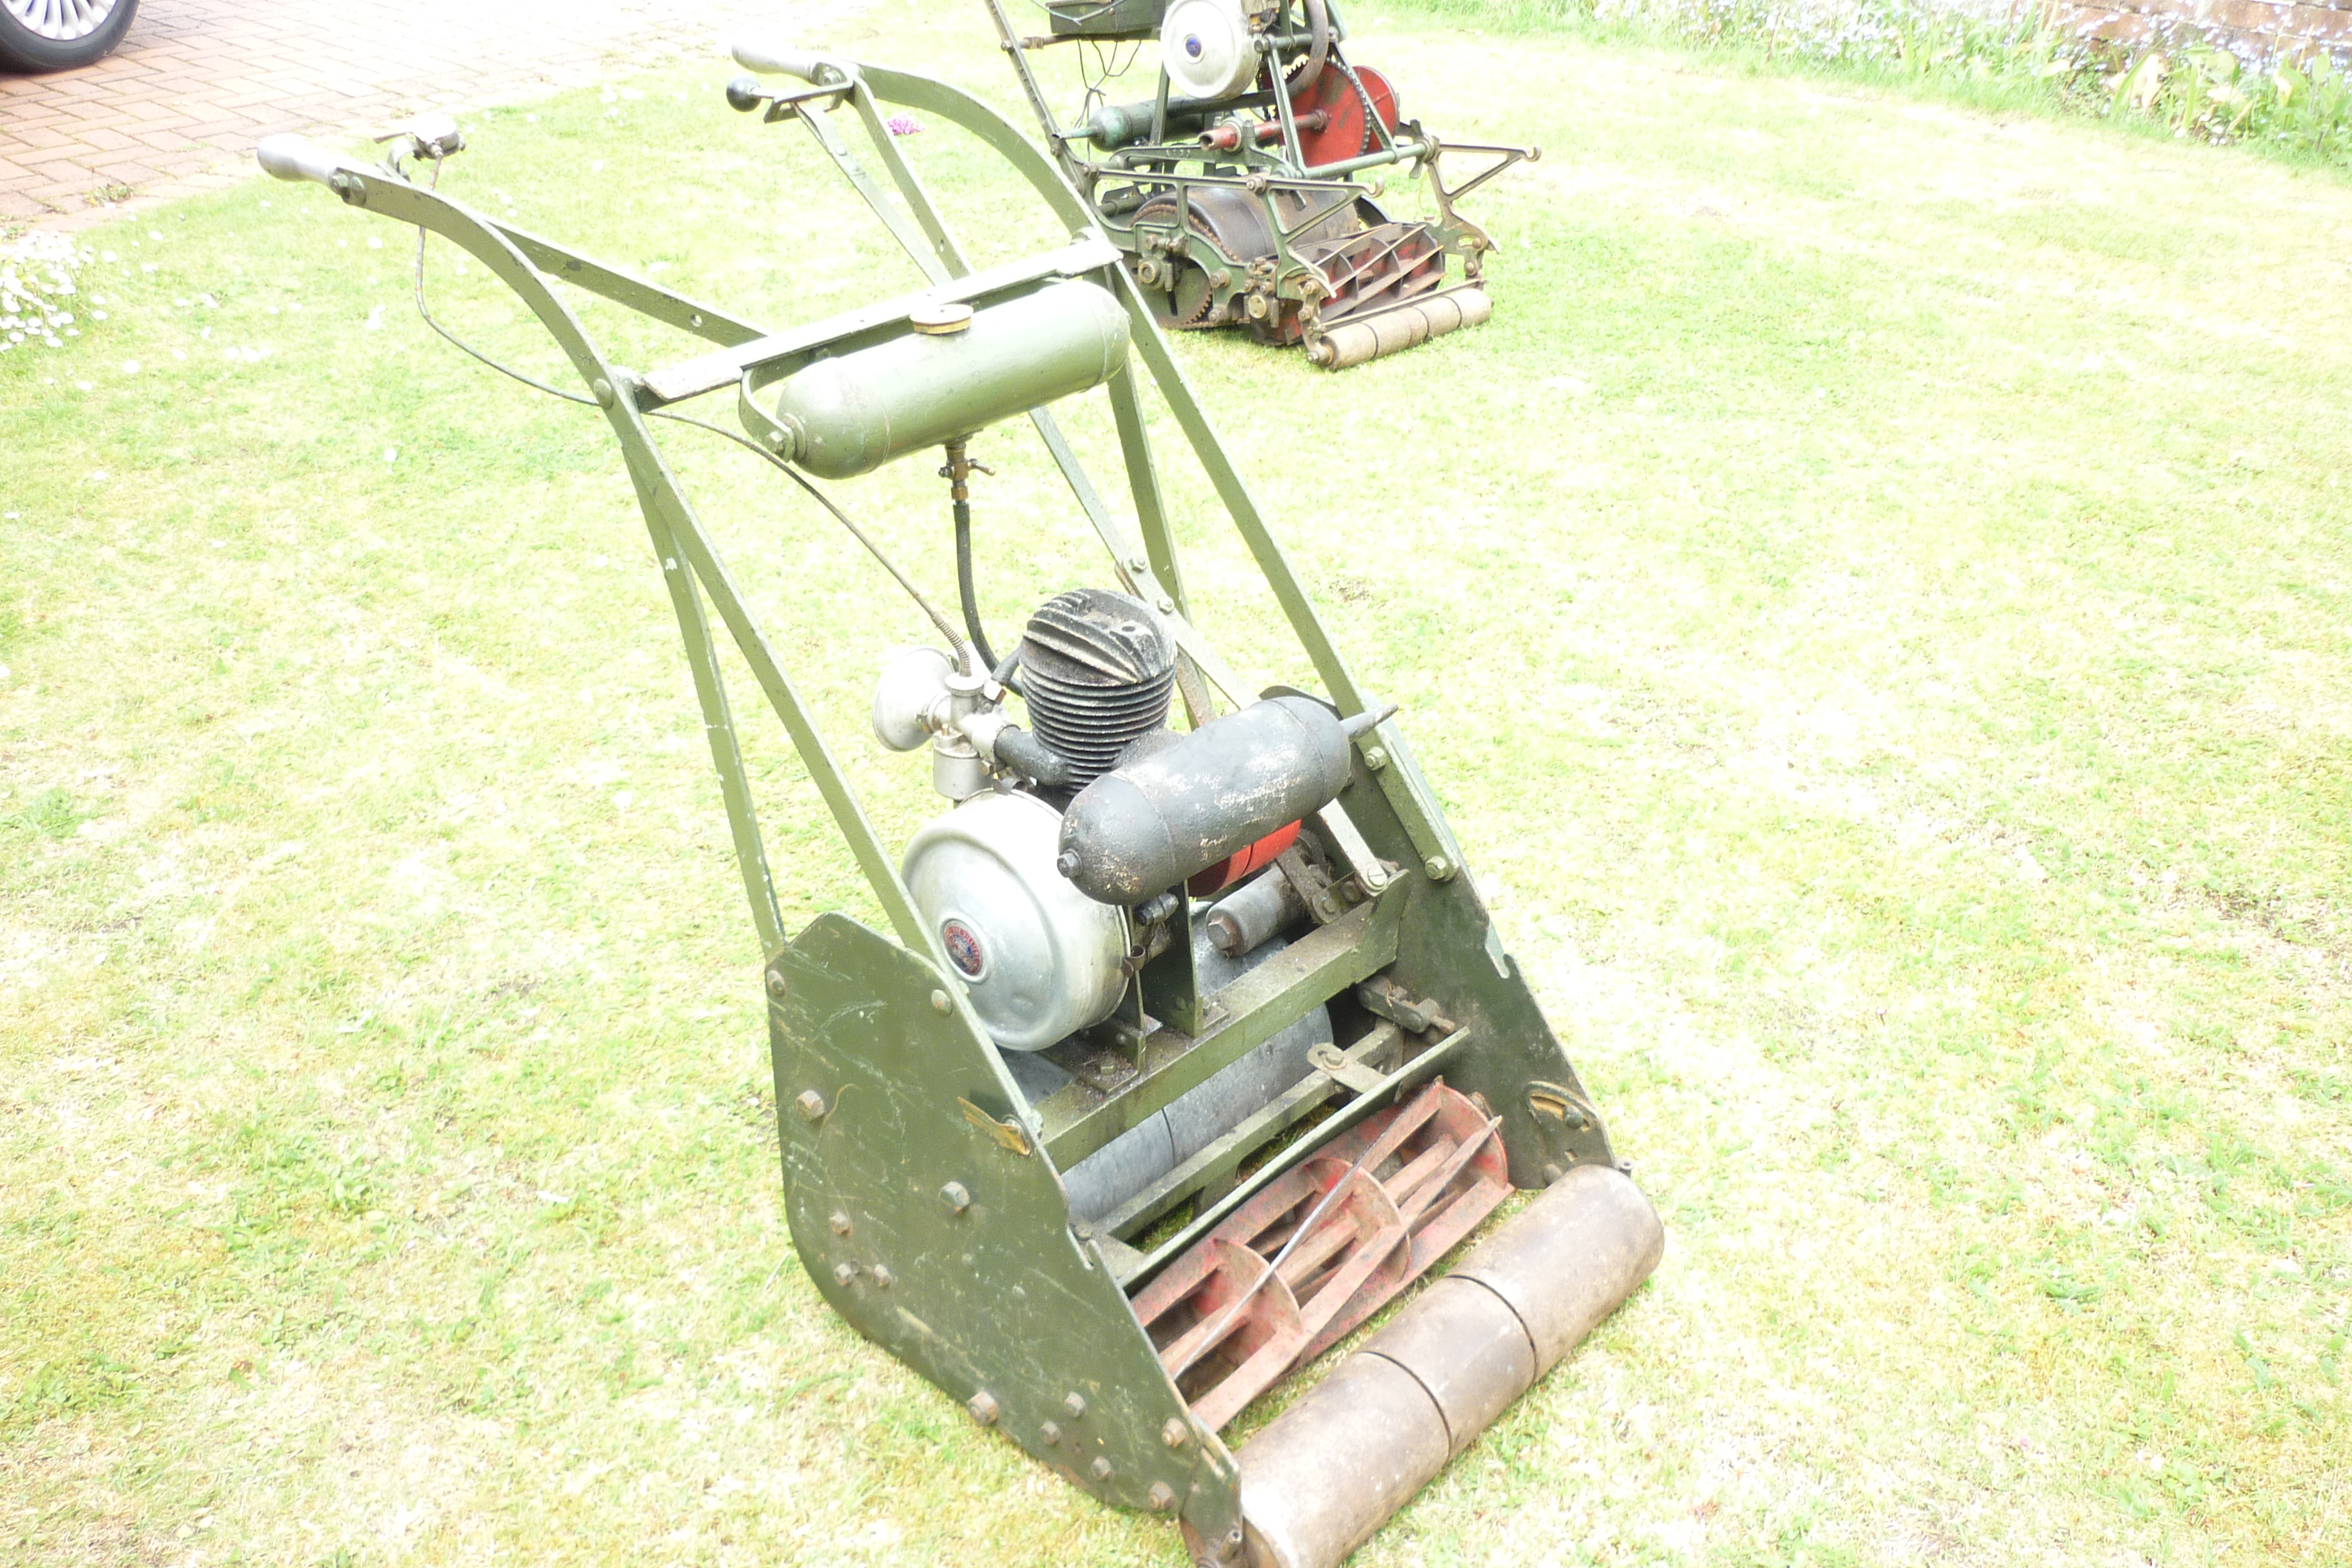 Purchased six years ago from a vintage rally. Simpathicaslly restored by me. I also put a smaller version of the correct petrol tank on the machine. This the mower that you will see me using in a photograph on the clubs website. It is missing its grassbox.